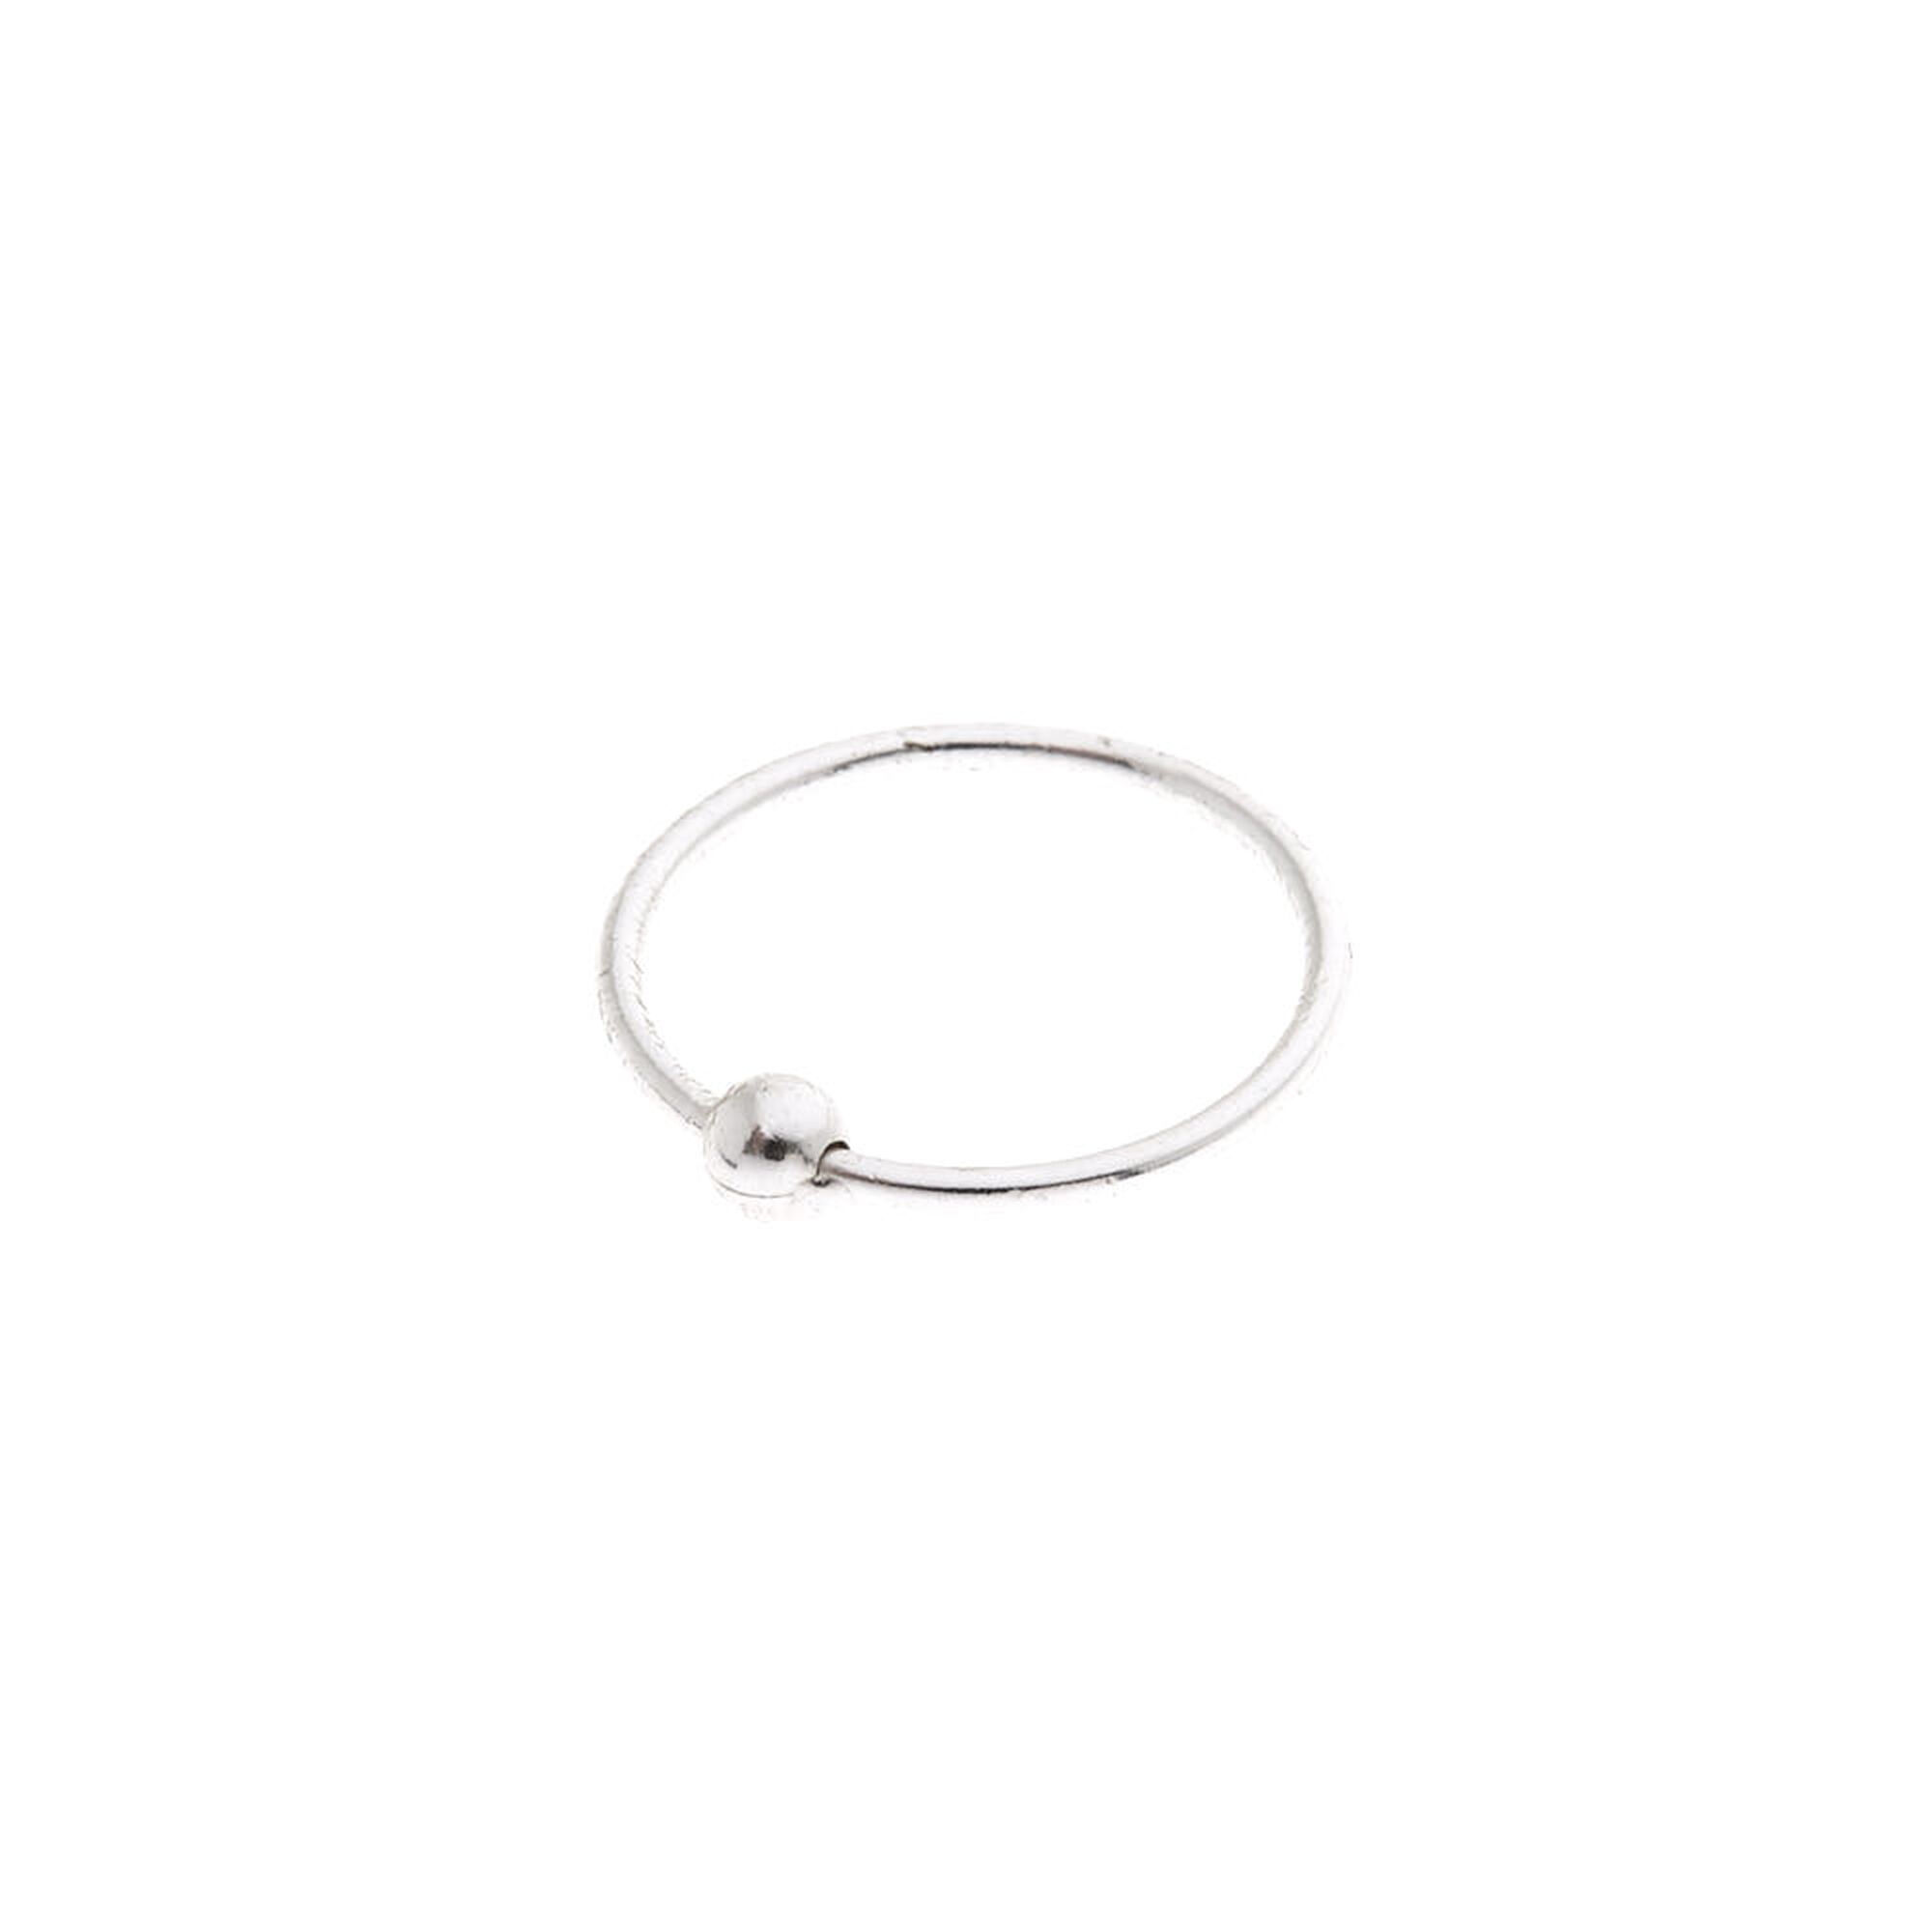 View Claires Basic Bead Hoop Nose Ring Silver information